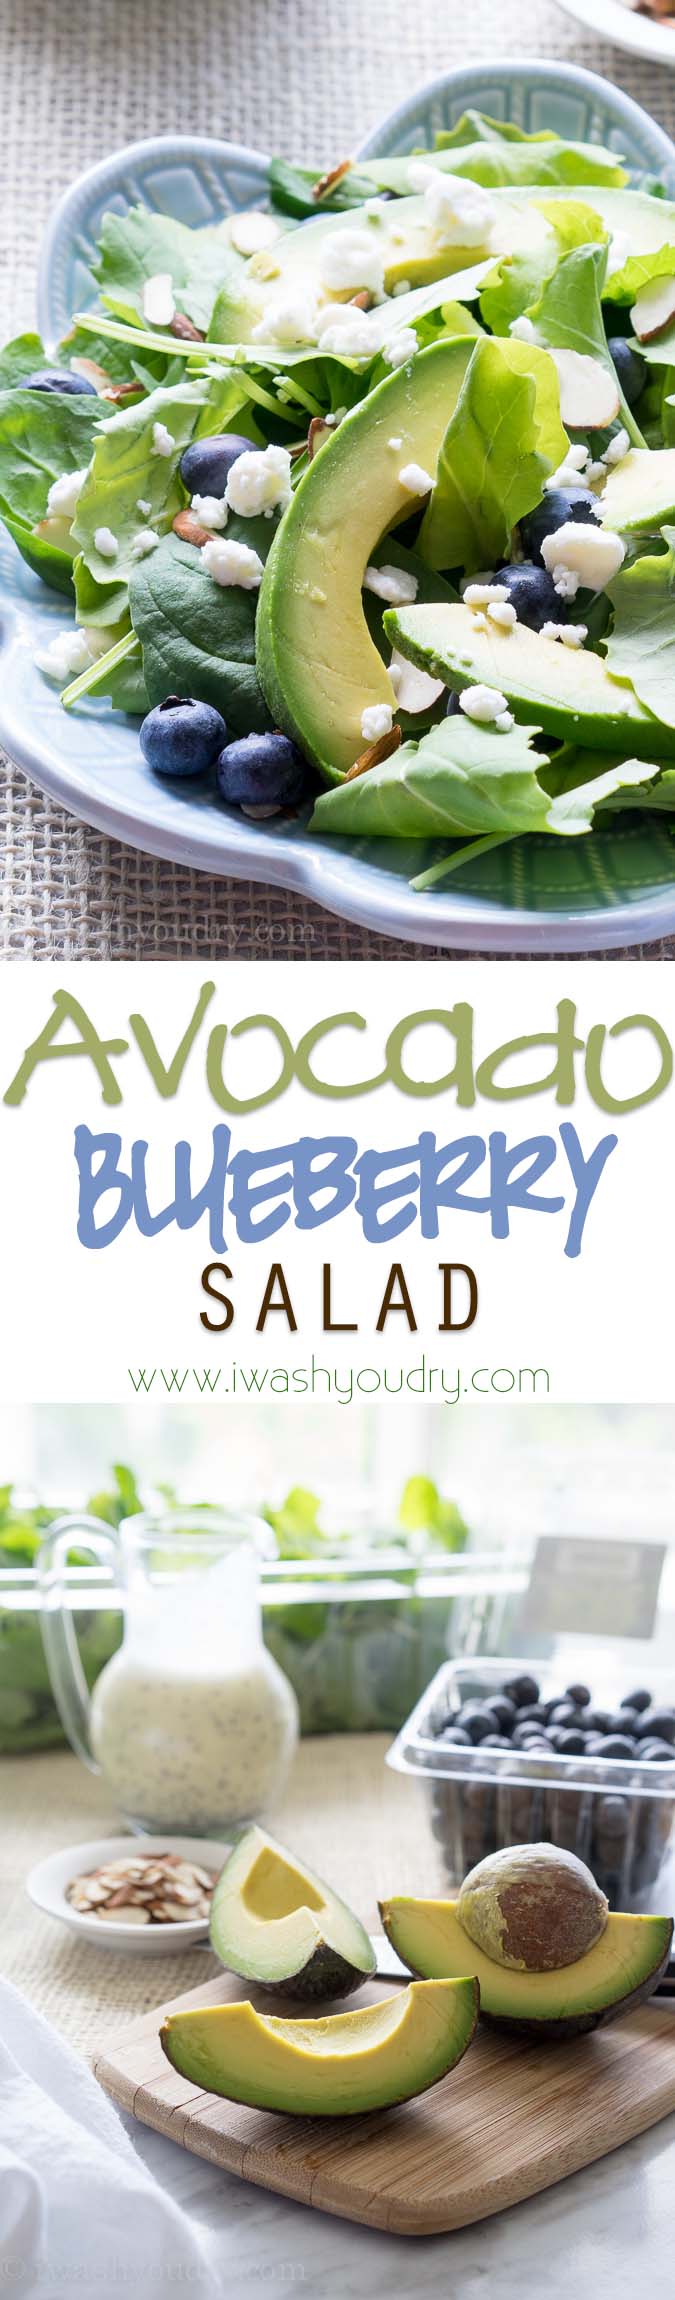 Healthy Superfood Avocad Blueberry Salad with a homemade Lemon Poppyseed Dressing!